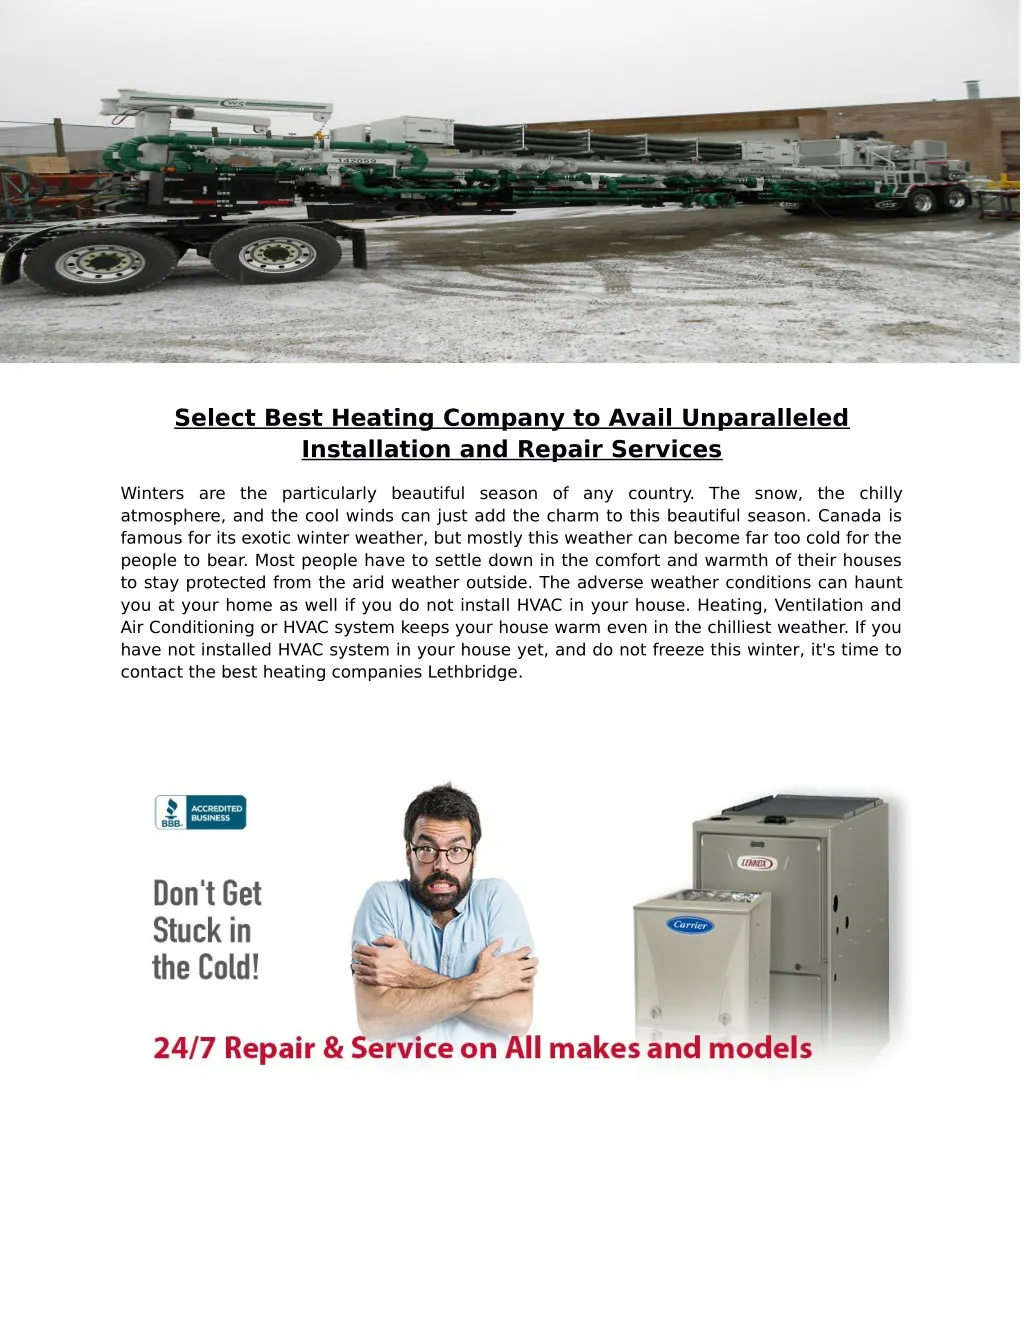 select best heating company to avail unparalleled